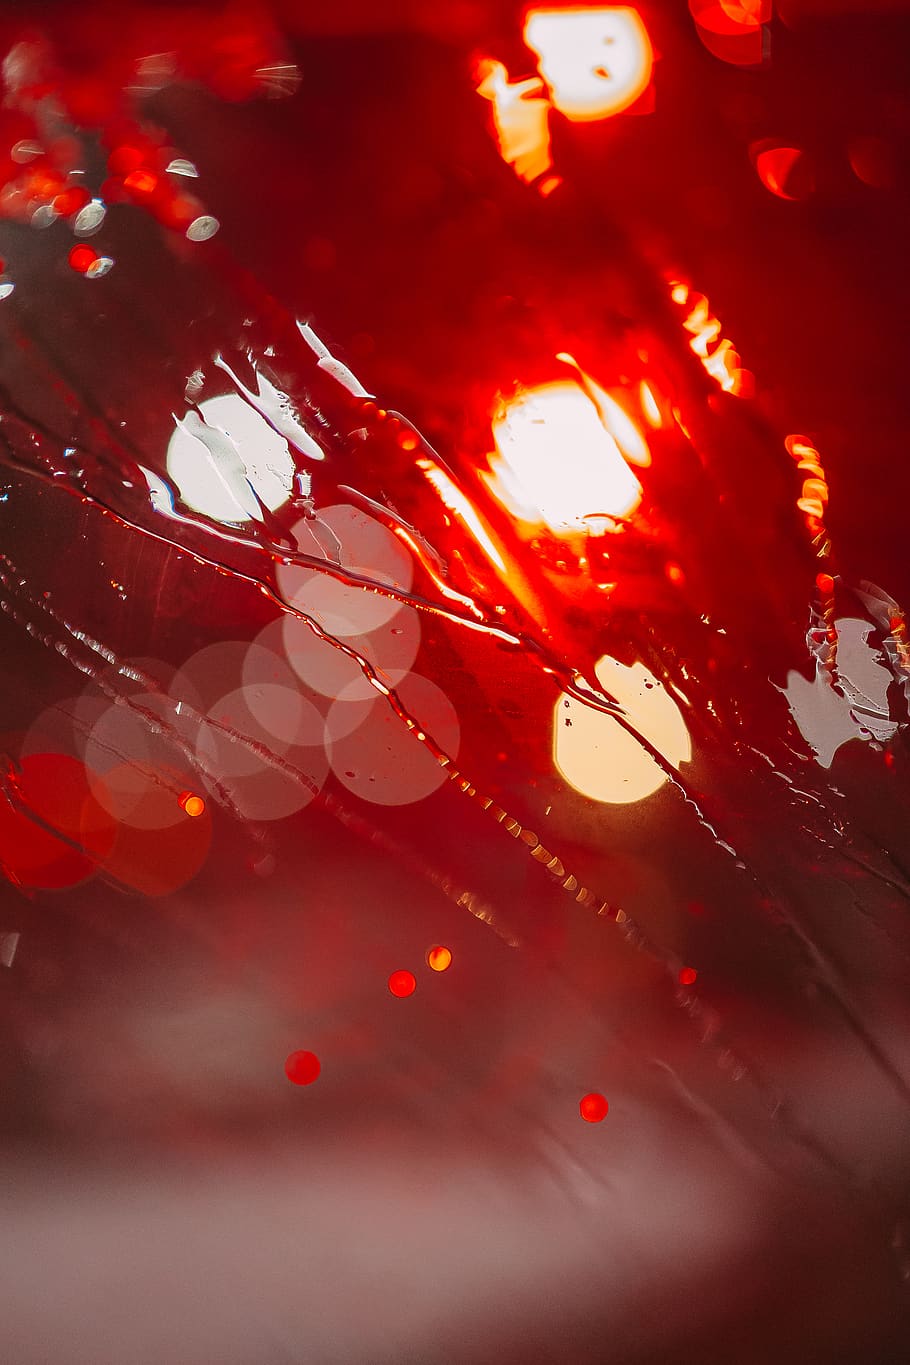 HD Wallpaper: Rain On The Window, Background, Red Light, Blur, Close Up, No People